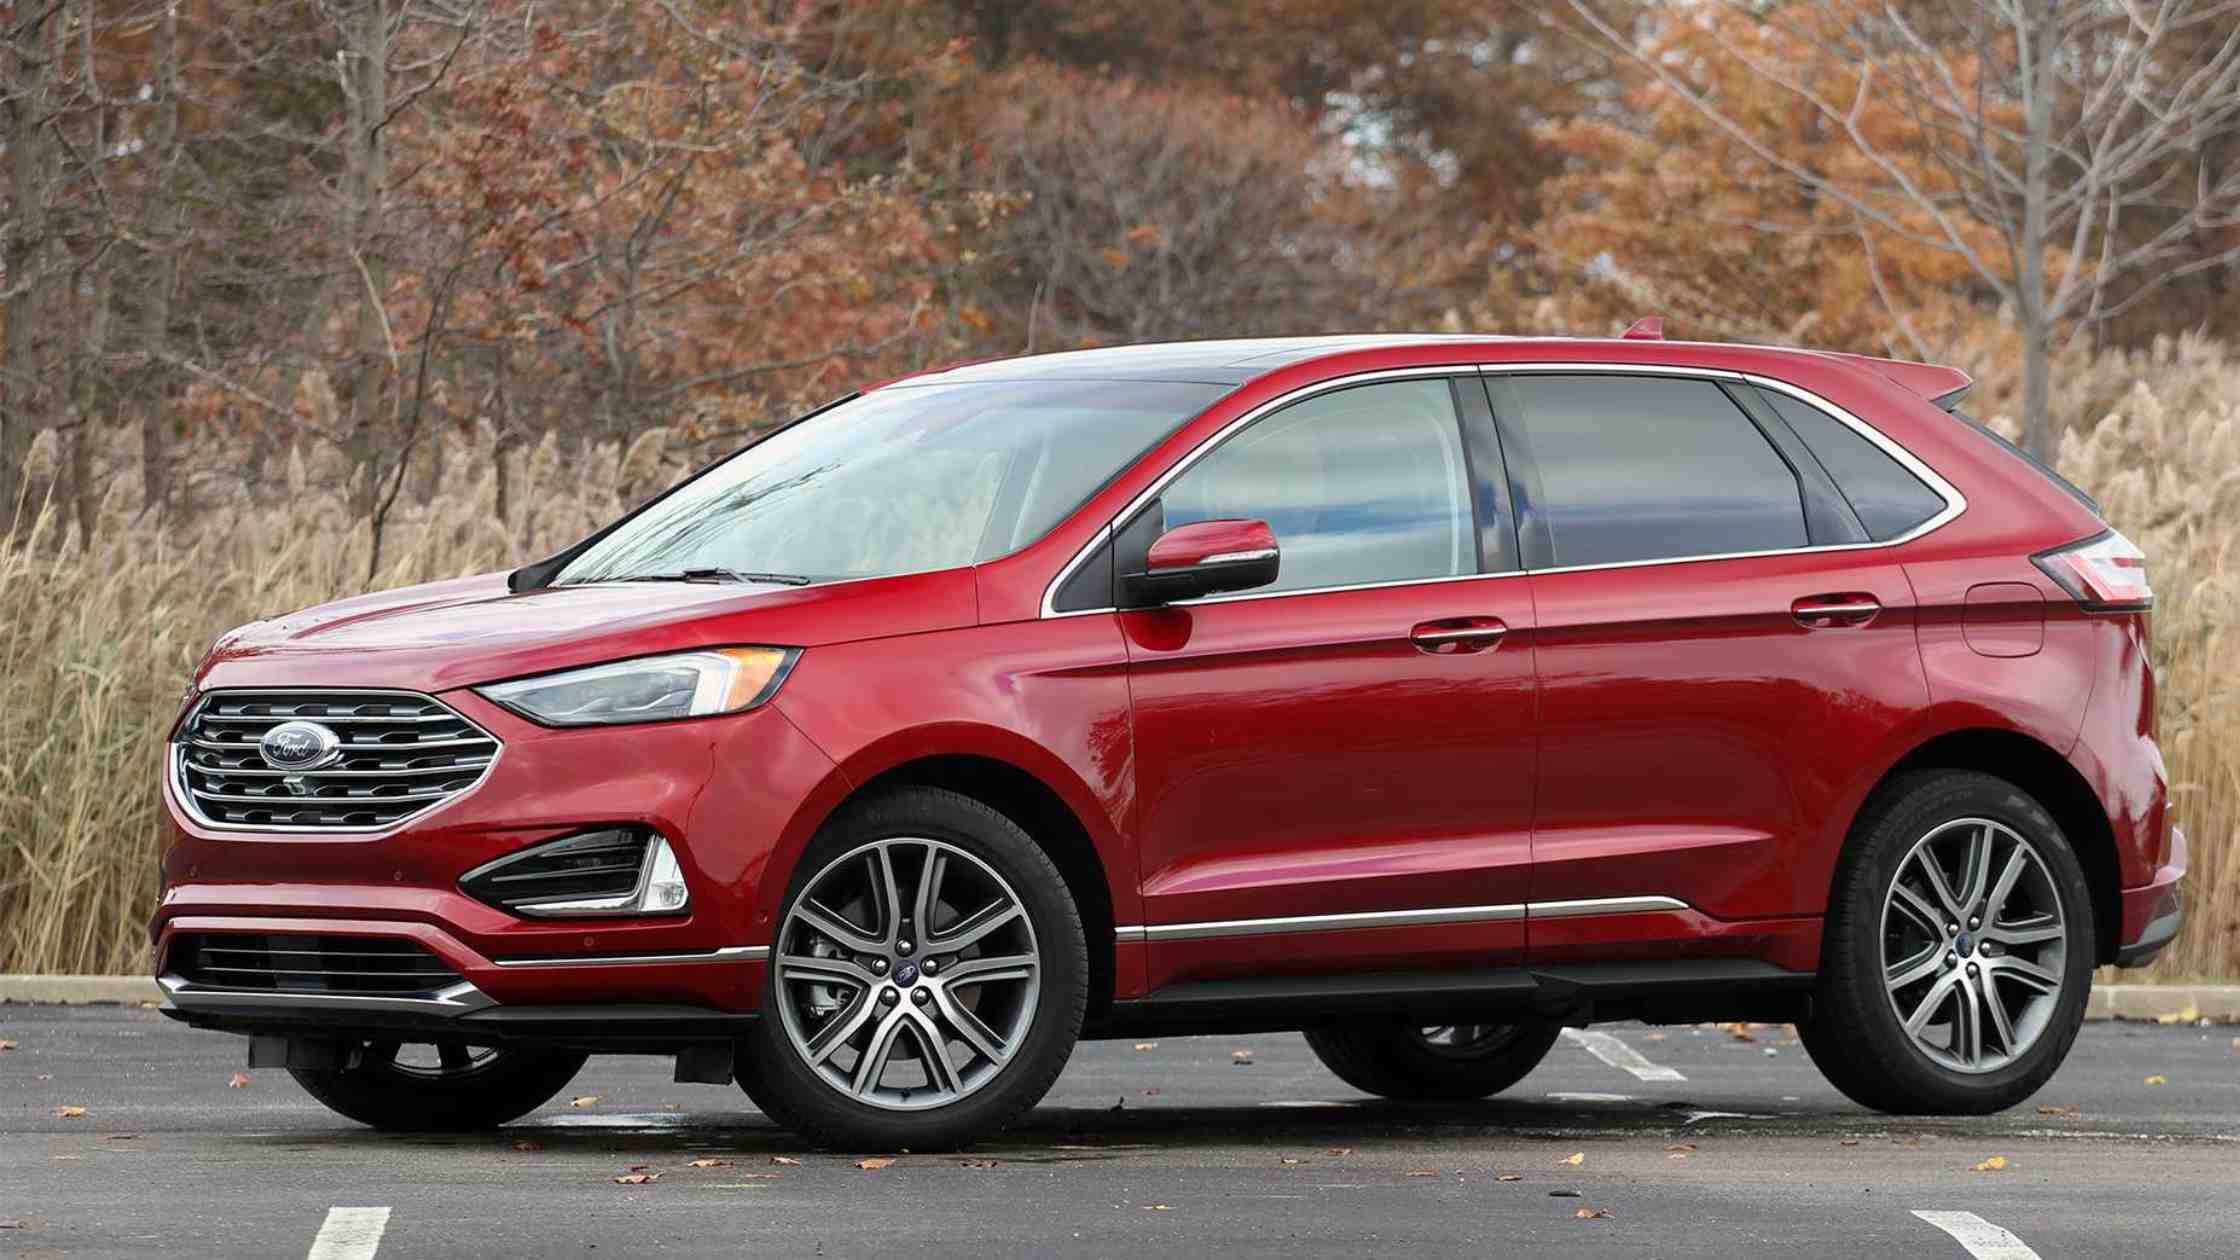 is the ford edge going to be discontinued, has the ford edge been discontinued, is the ford edge getting discontinued, has ford discontinued the edge